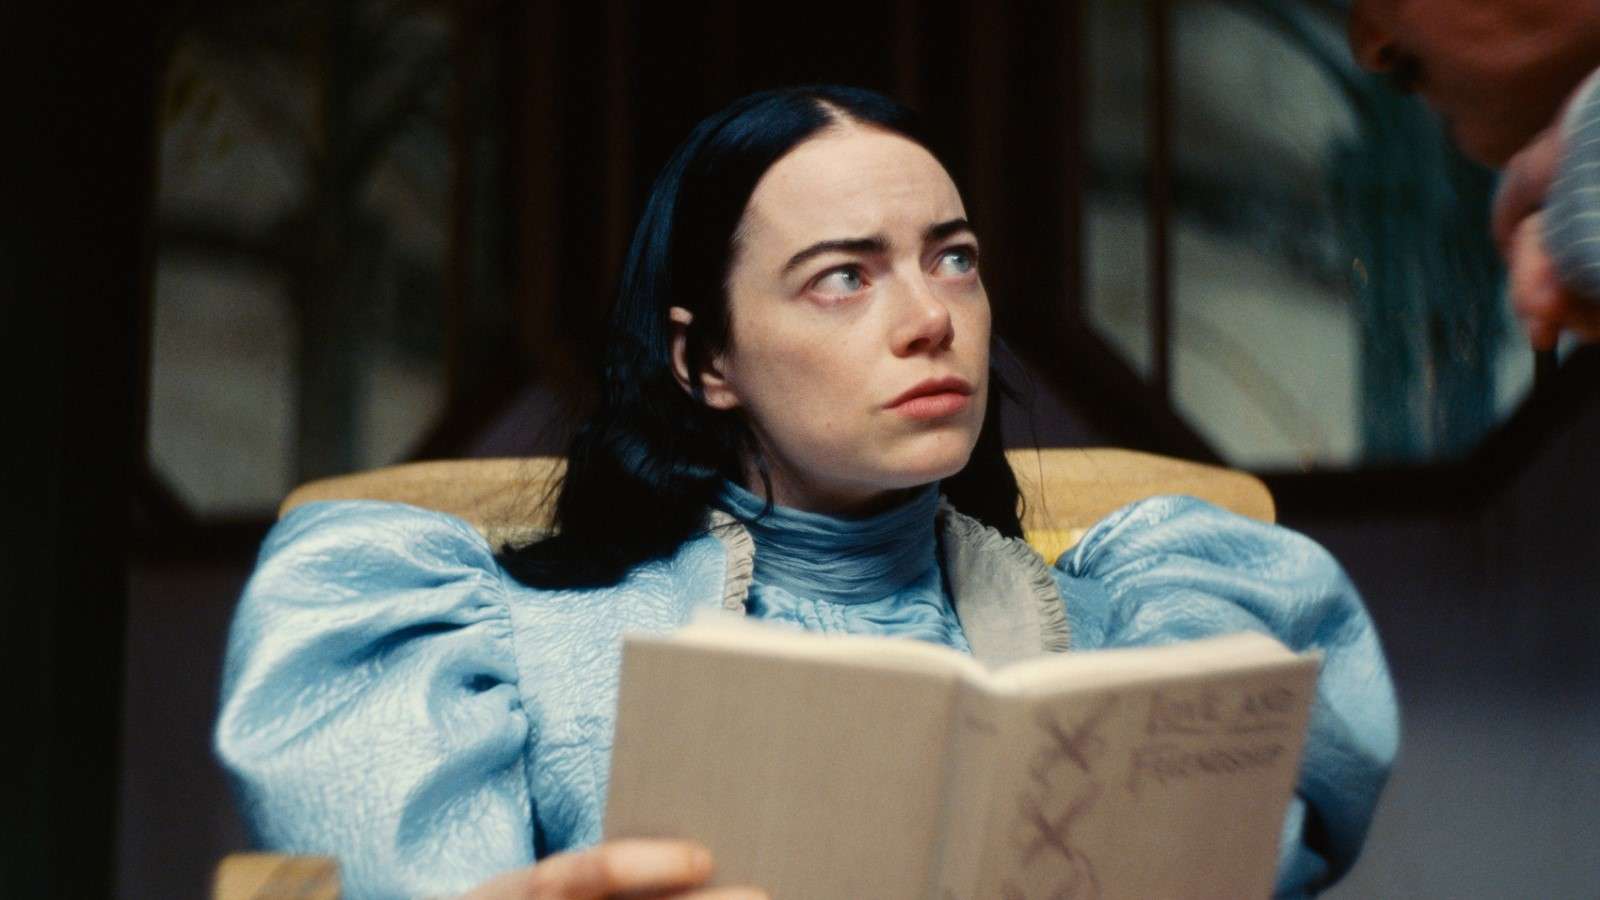 Emma Stone as Bella Baxter in Poor Things, reading a book